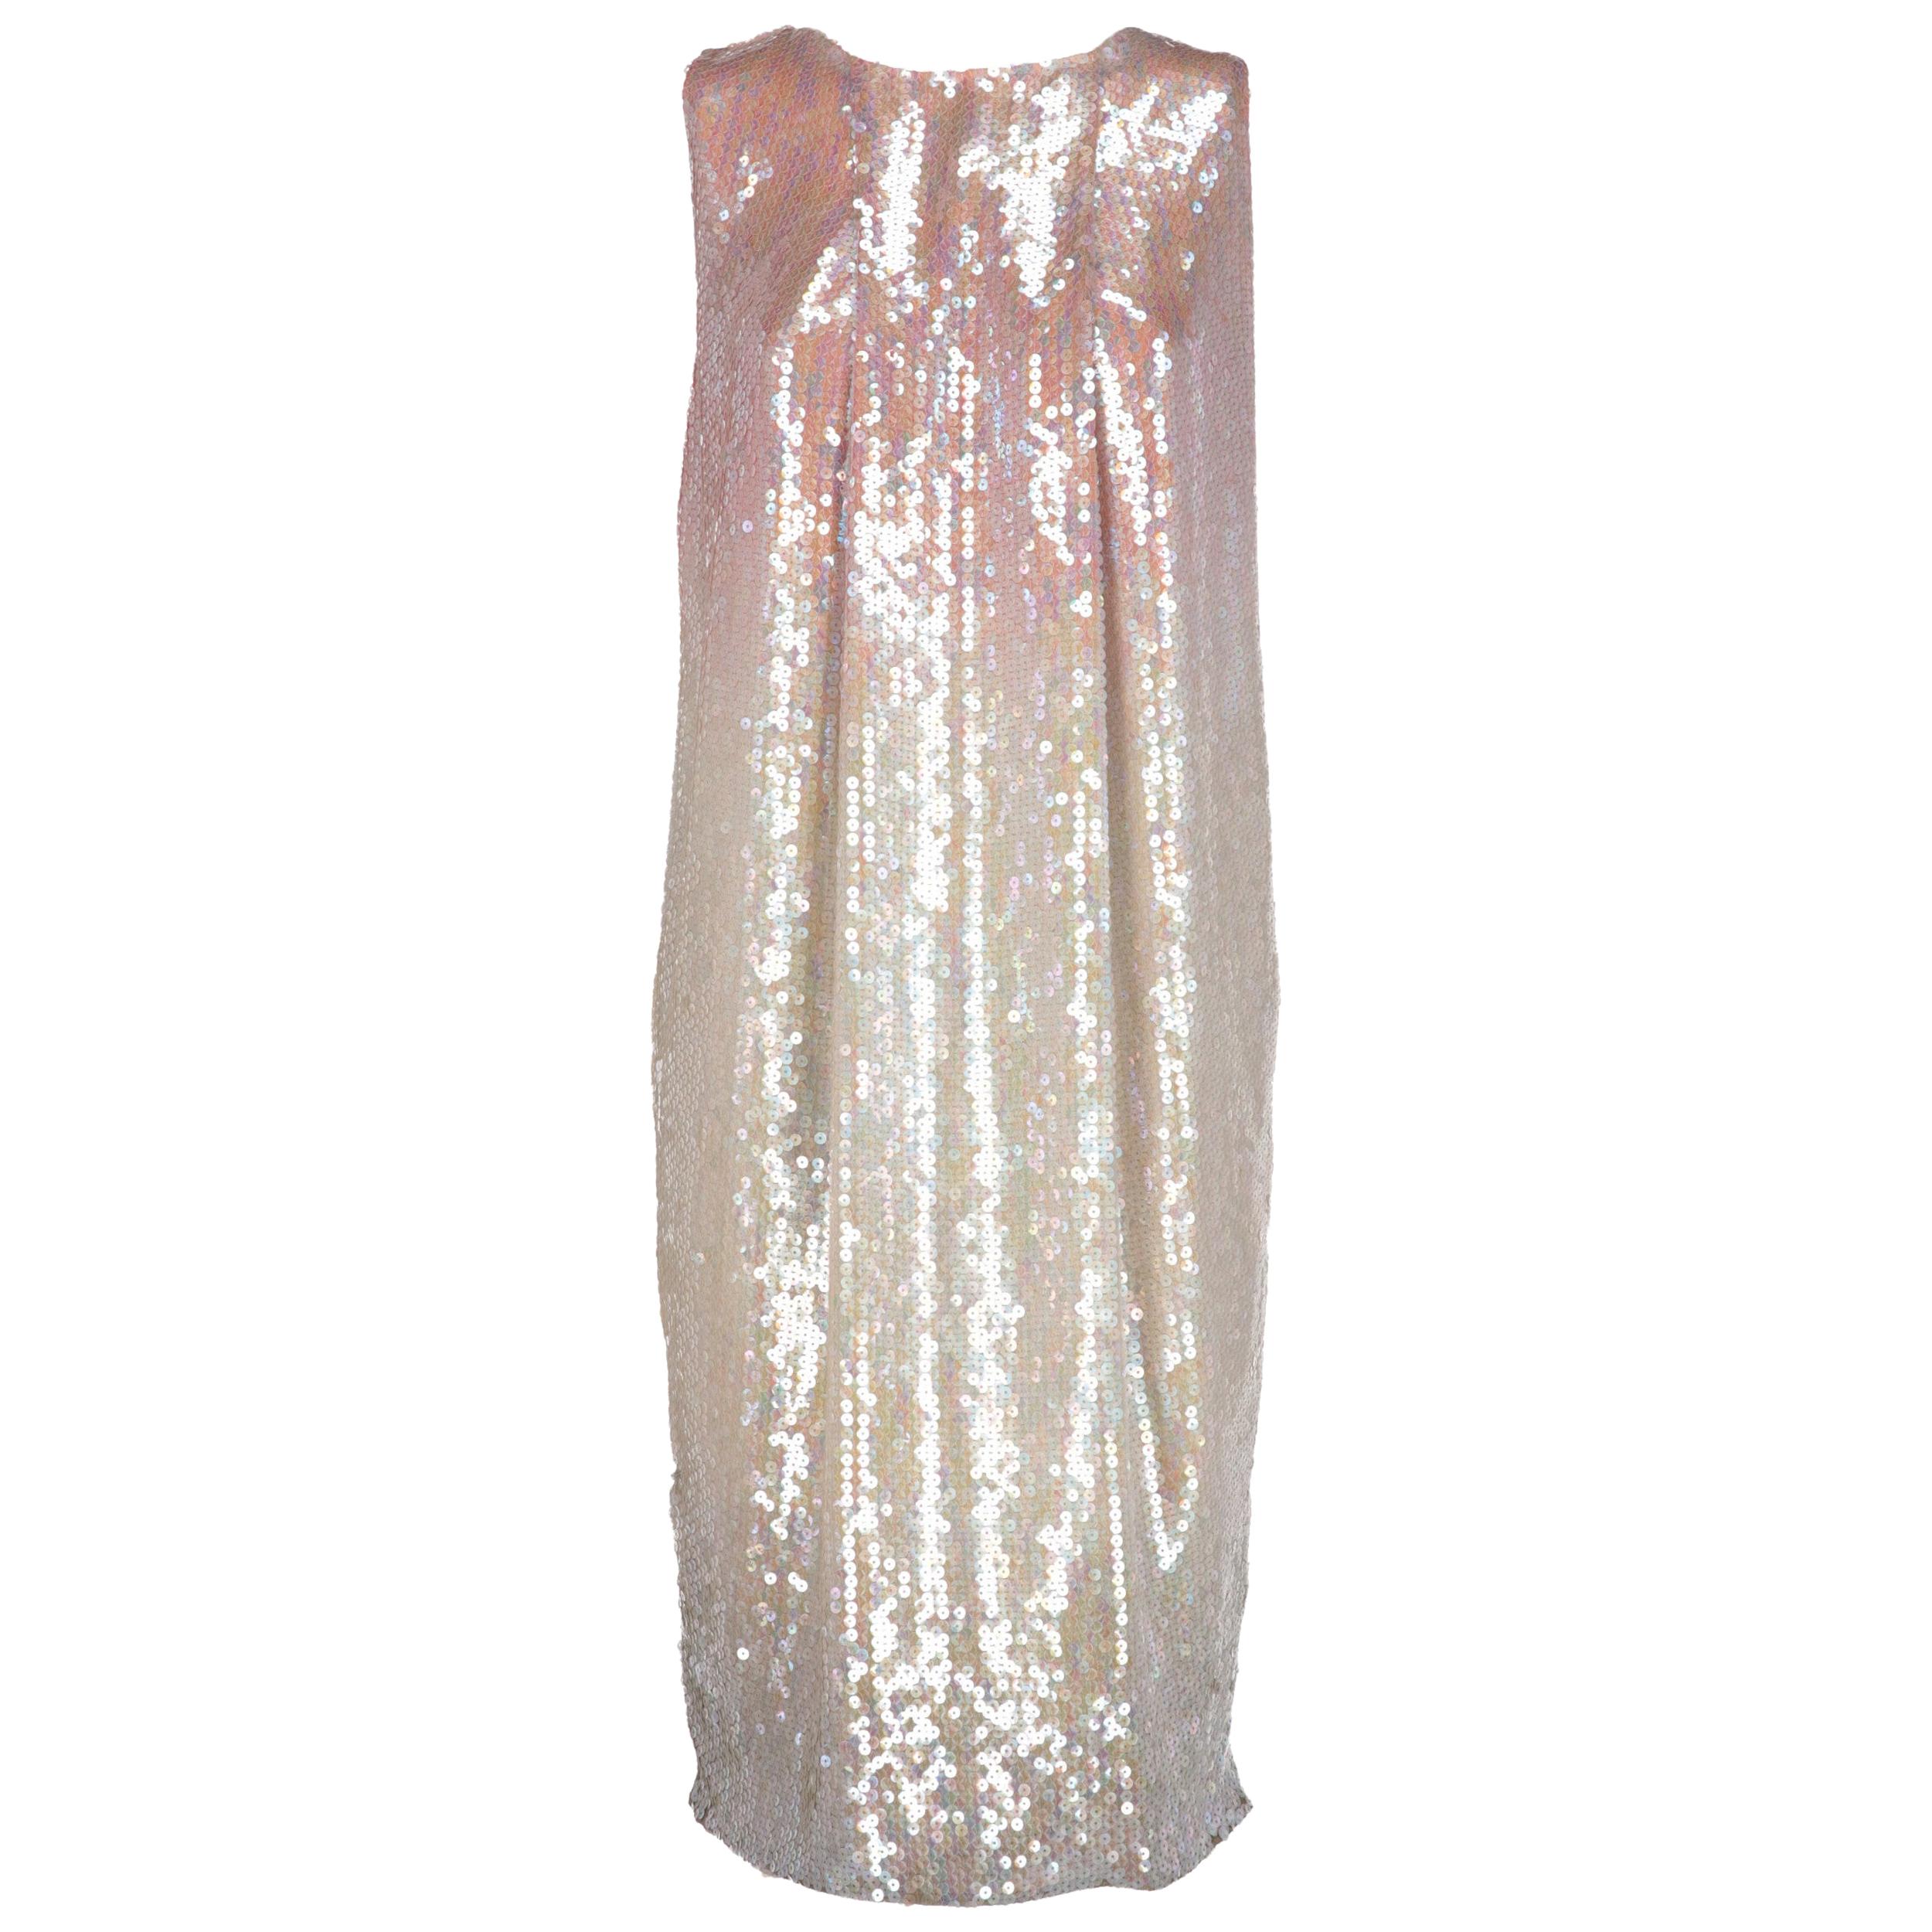 2010s Jil Sander Silk and Sequins Dress in shades of pink, ivory and light grey